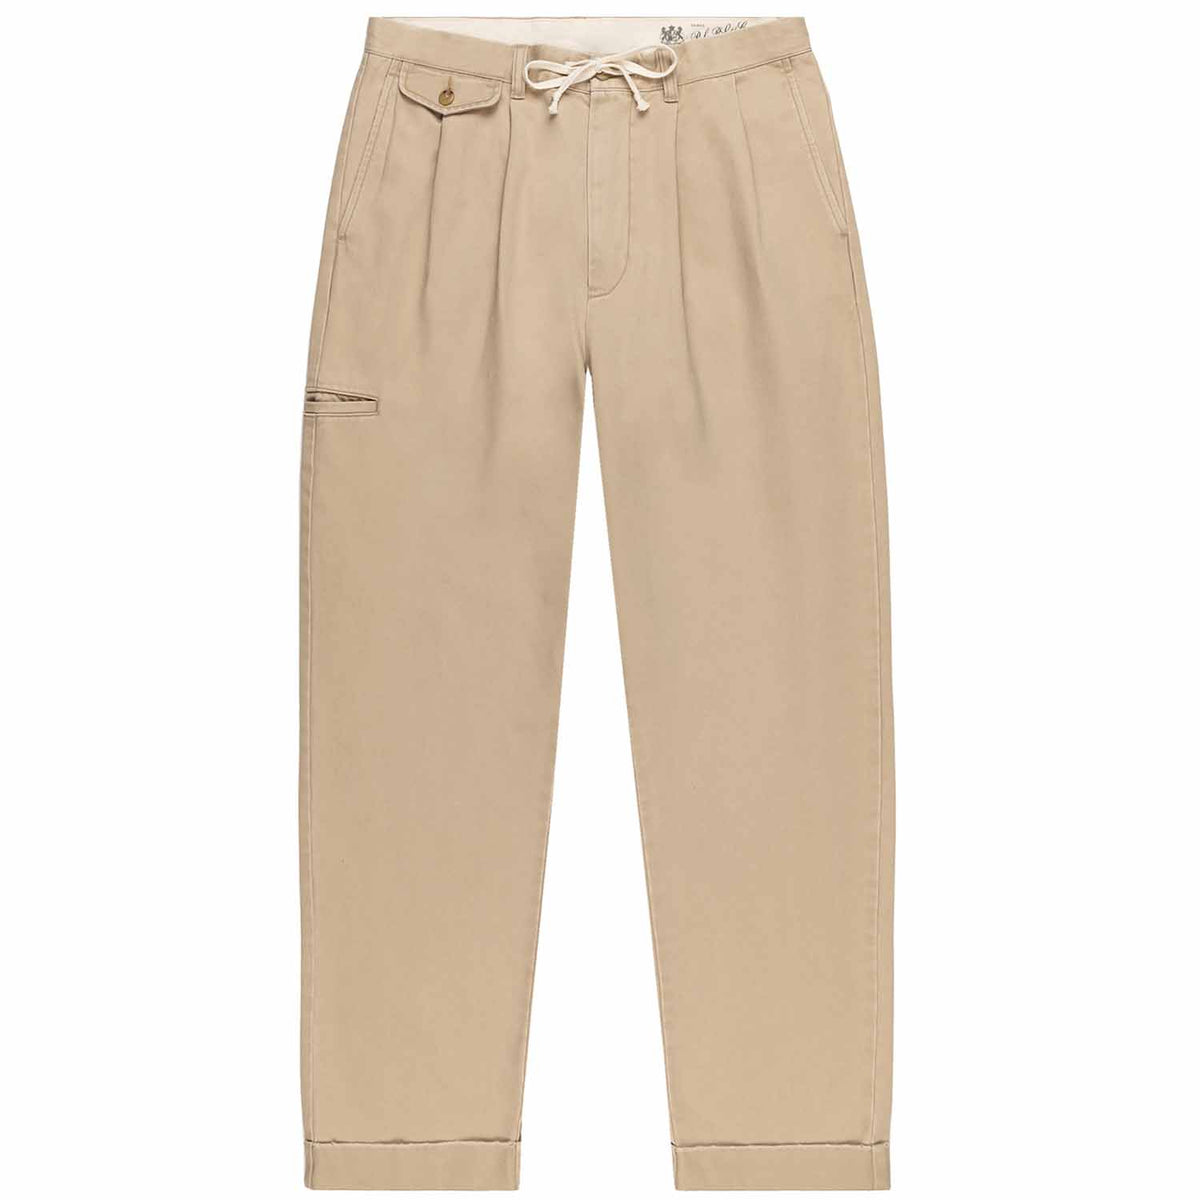 Polo Ralph Lauren x Element Whitman Chino in tan with added cream draw string. Small pocket on front right hip and small pocket on right middle leg.